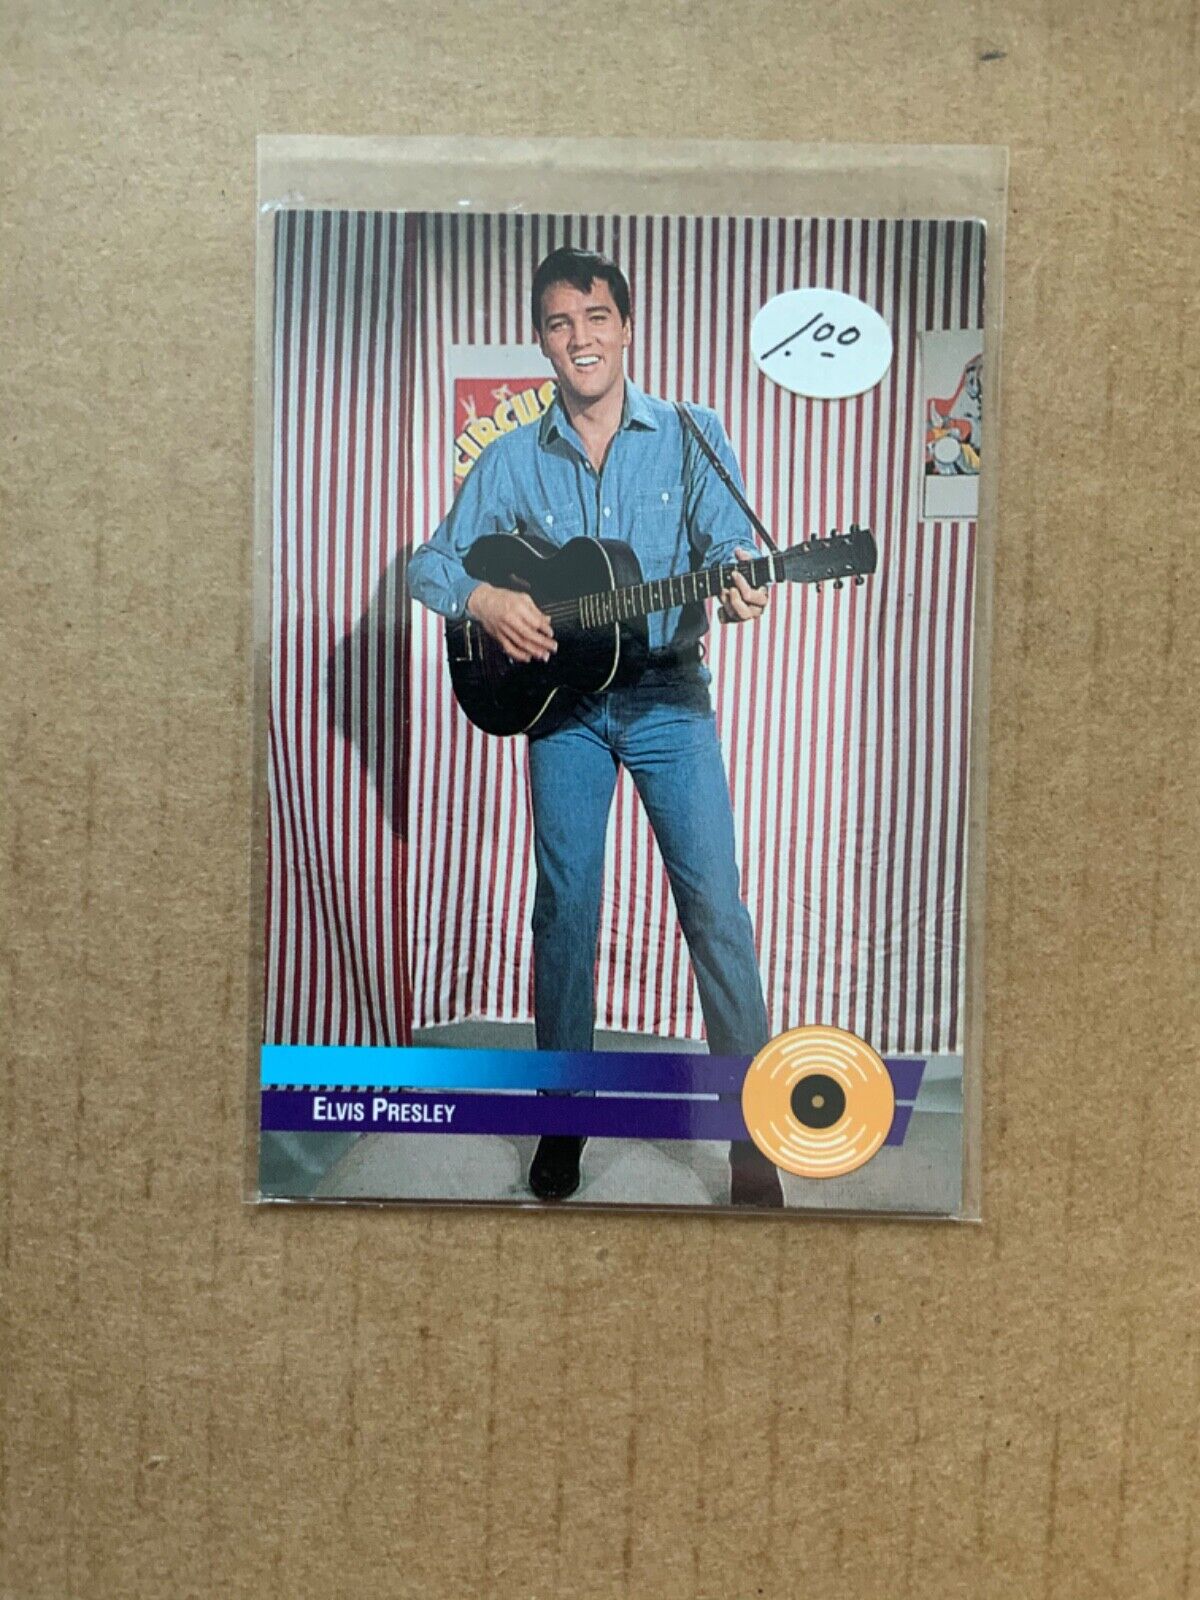 1992 ELVIS GOLD & PLATINUM RECORDS CARDS #1-50  $1.00 Each, You Pick From List.